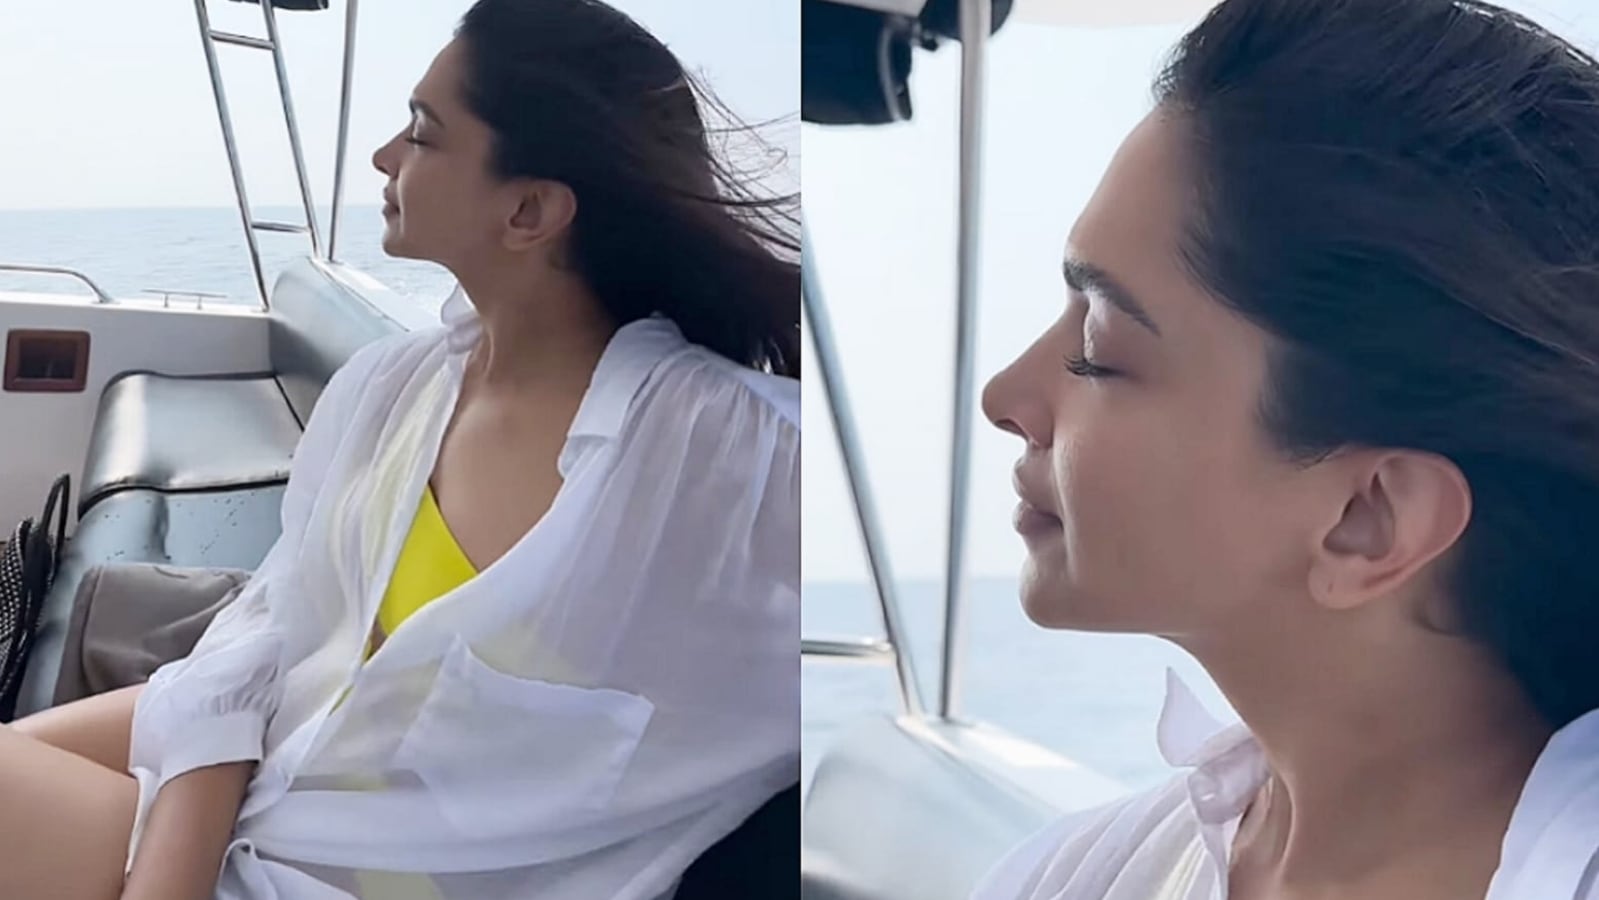 Deepika Padukone chills on yacht, thanks fans for birthday wishes. Watch |  Bollywood - Hindustan Times